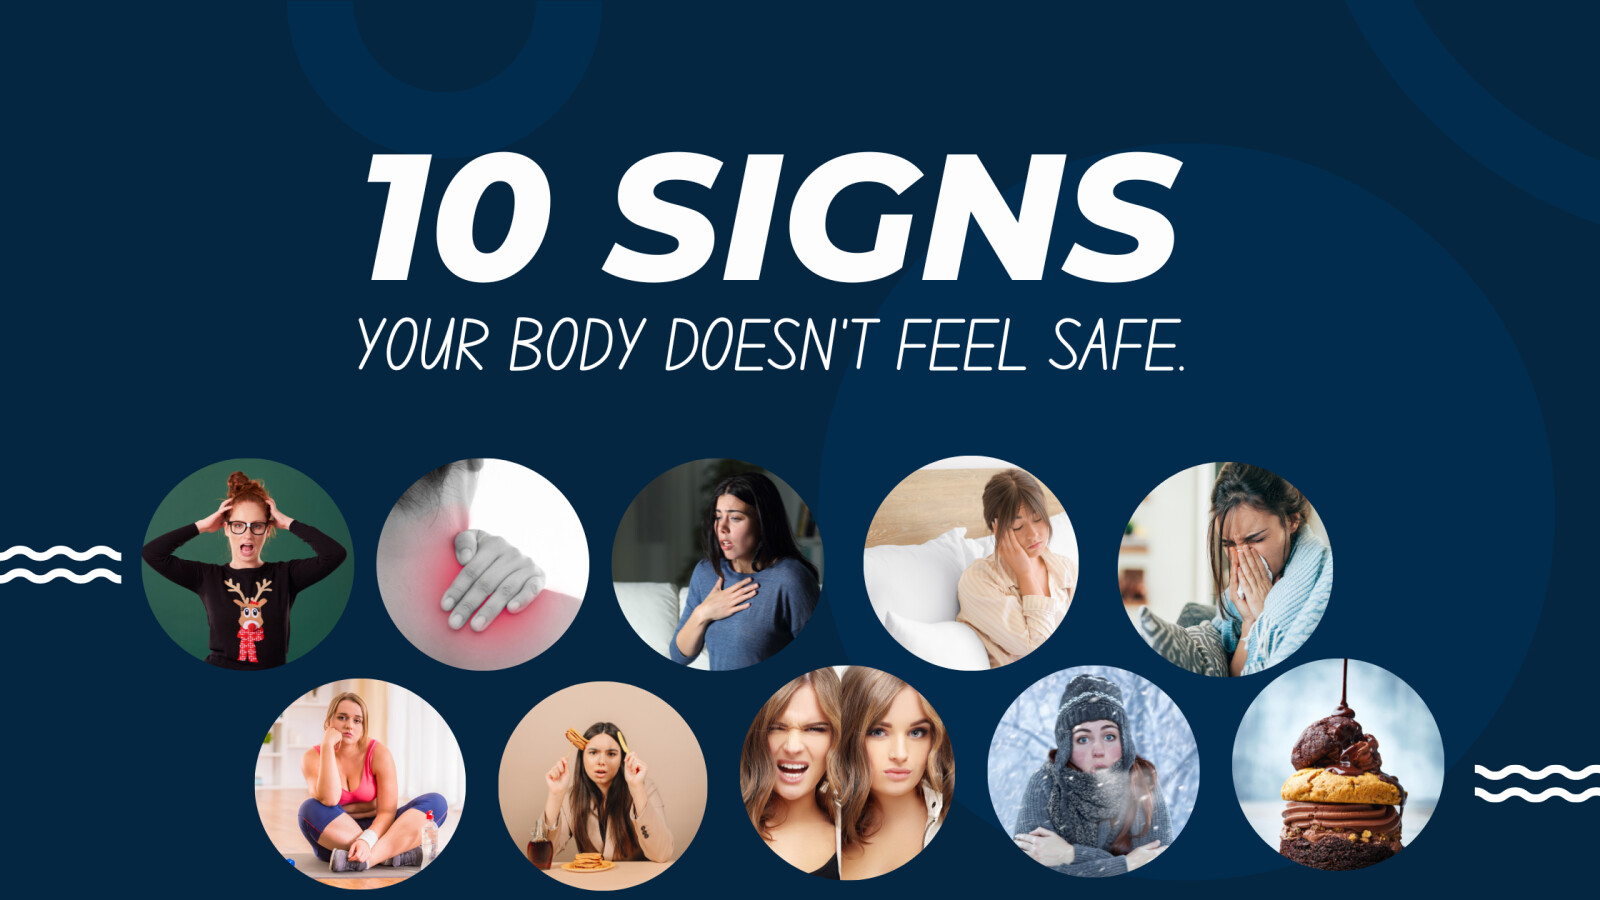 10 Signs Your Body Doesn't Feel Safe